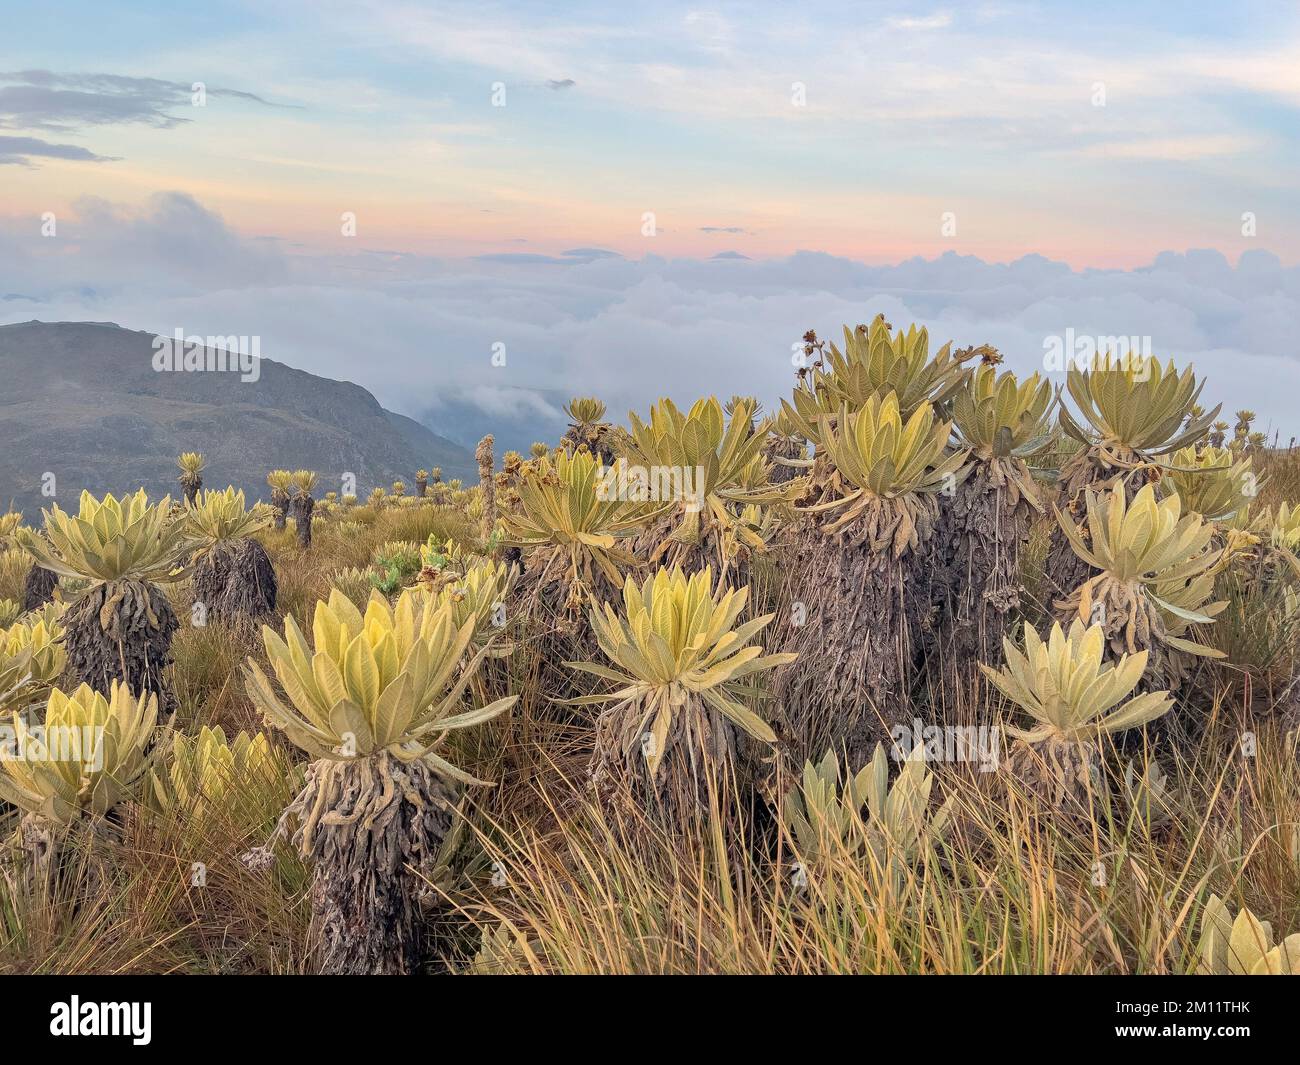 South America, Colombia, Department of Antioquia, Colombian Andes, Urrao, sunset at ramo del Sol Stock Photo